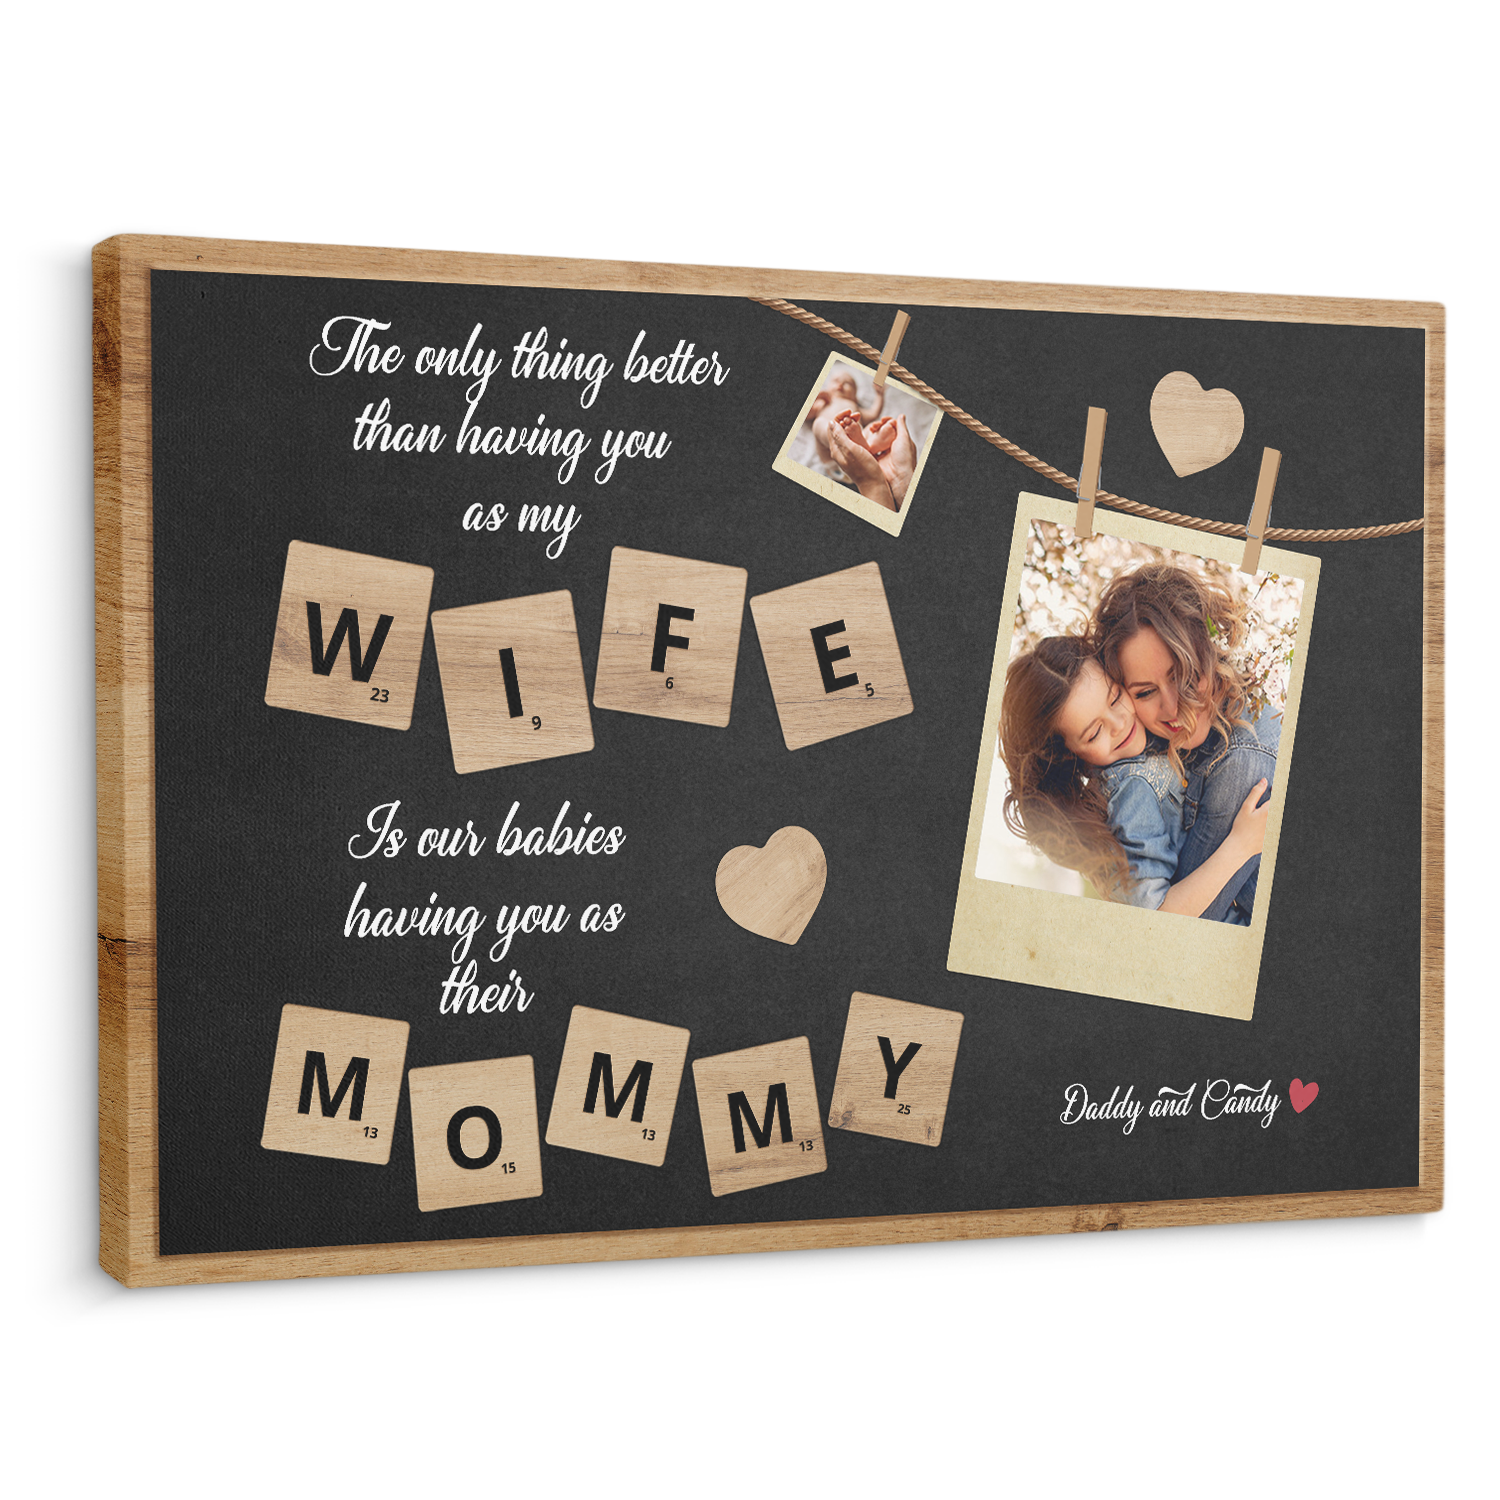 Wife And Mommy Custom Photo Collage, Customizable Name Canvas Wall Art